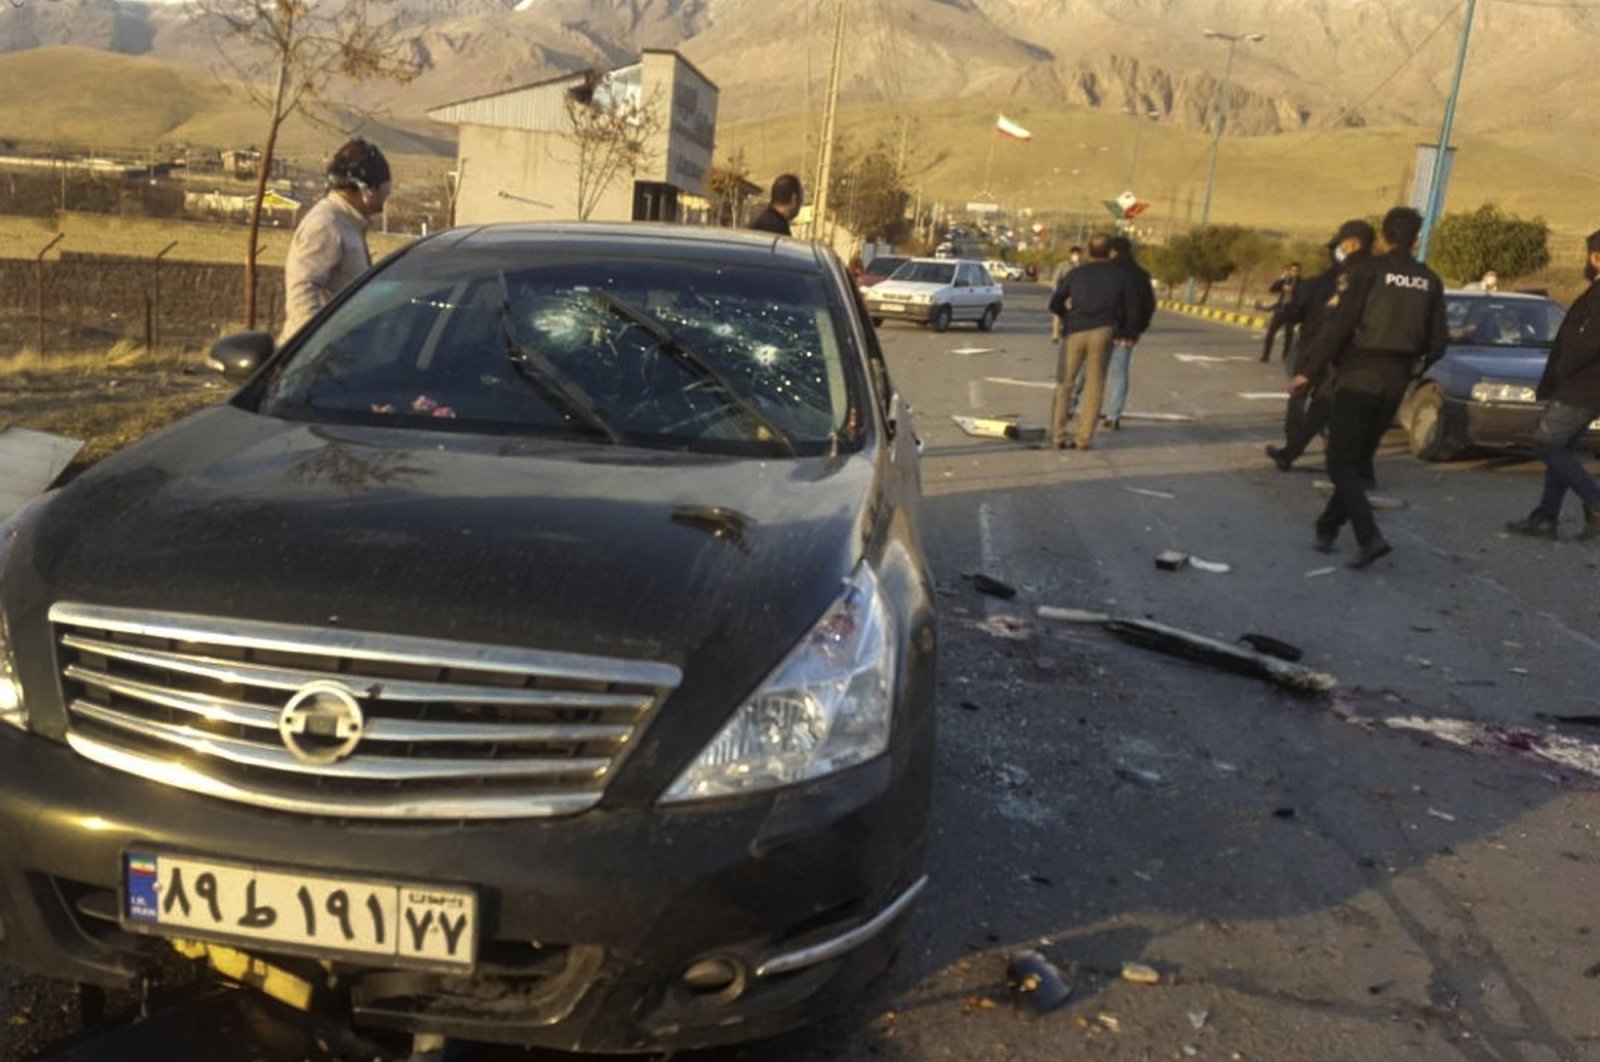 This photo released by the semi-official Fars News Agency shows the scene where Mohsen Fakhrizadeh was killed in Absard, a small city just east of the capital, Tehran, Iran, Friday, Nov. 27, 2020. (AP Photo)